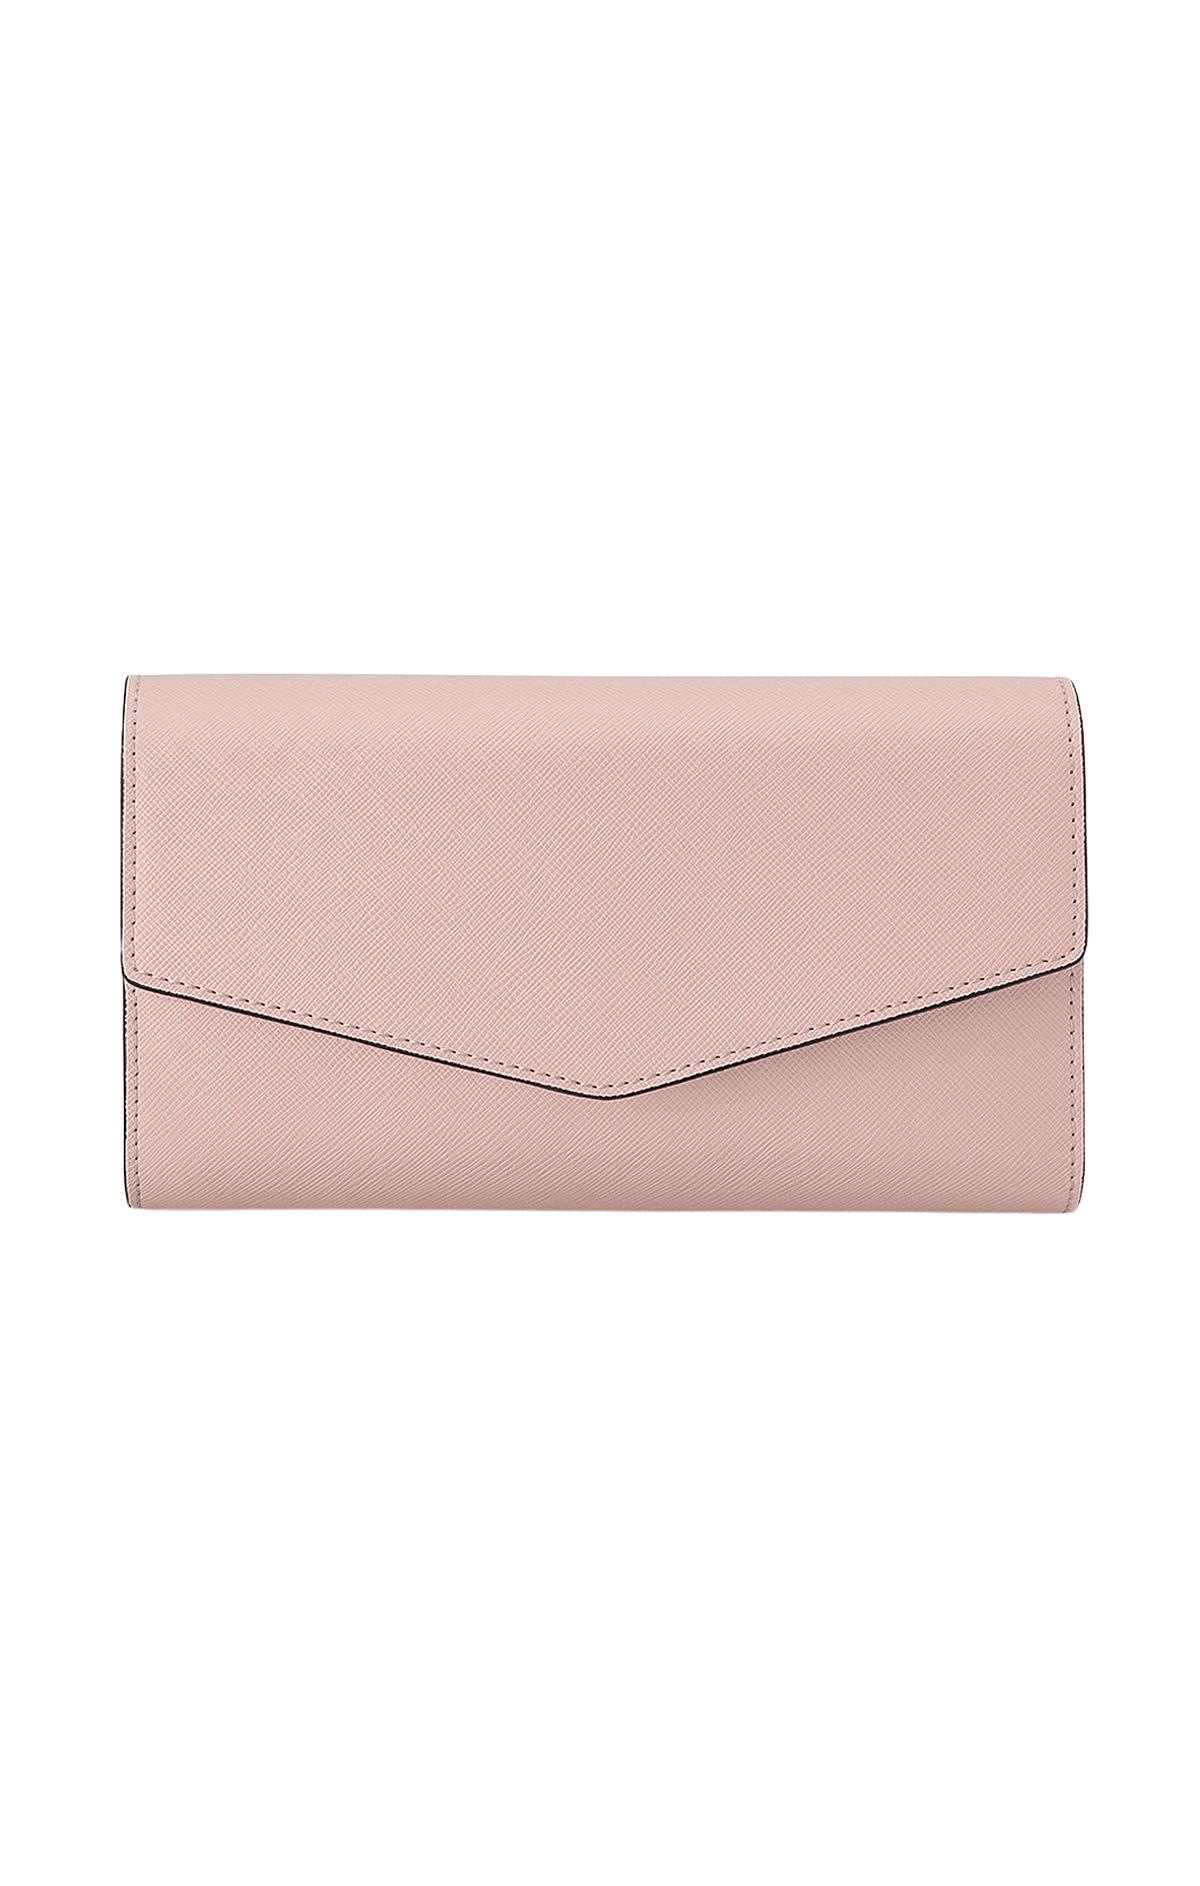 ACCESSORIES Bags Clutches One Size / Pink NIC ENVELOPE CLUTCH IN BLUSH